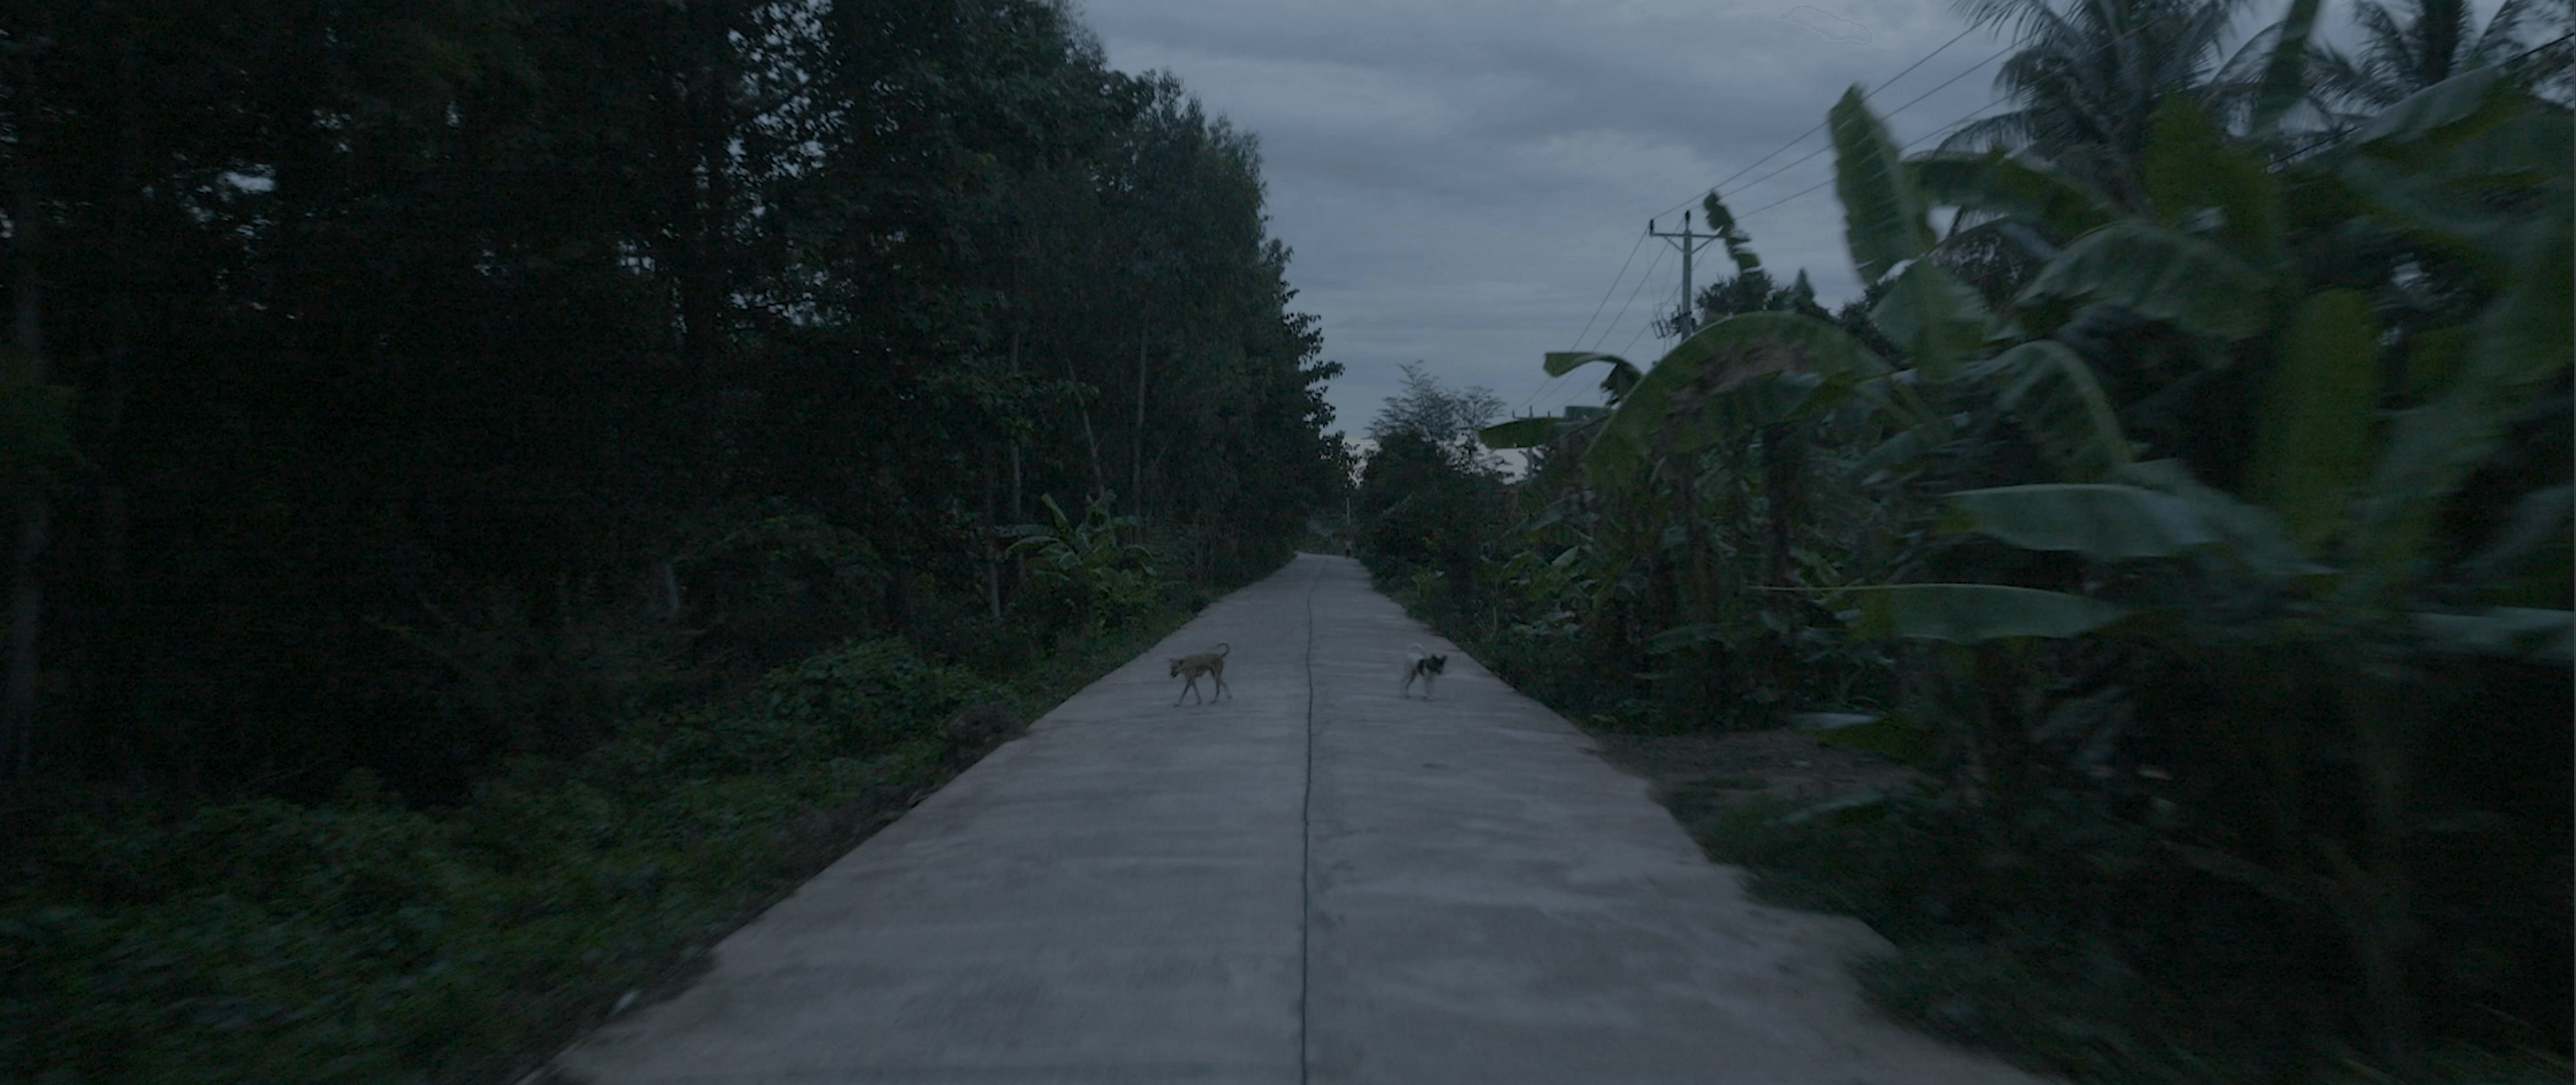 Still from Eskape. Center shot of a concrete road flanked on both sides with green vegetation, including trees and banana palms. A power line runs alongside the righthand side of the road. The sky is overcast. Two stray dogs, one brown and one black-and-white, are walking on the road.